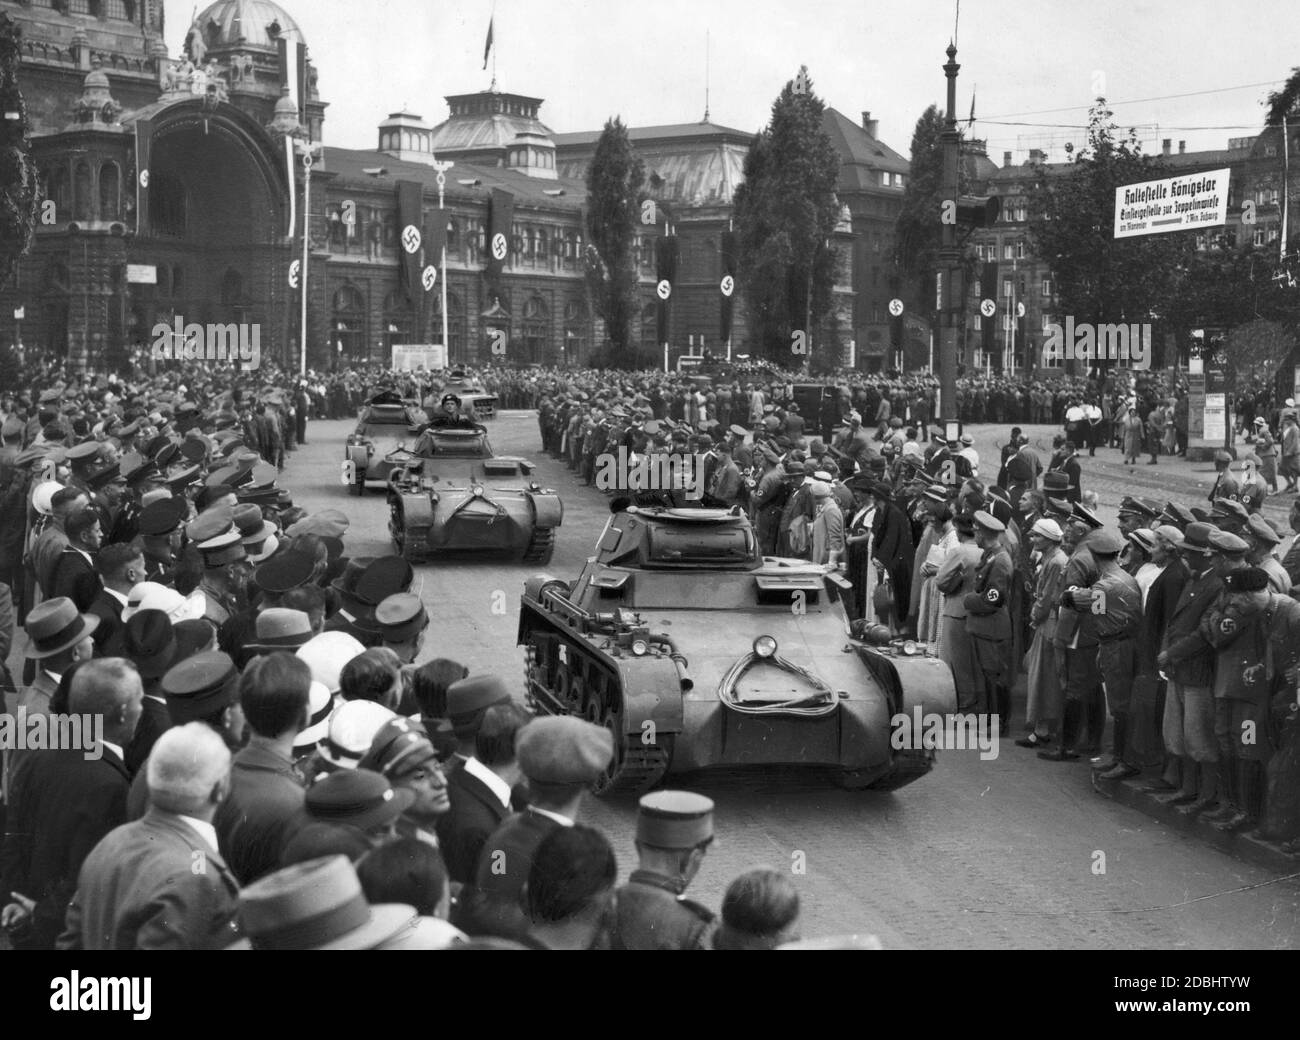 'Before the ''Day of the Wehrmacht'' at the Nazi Party Congress in Nuremberg a column of new tanks (Panzerkampfwagen I) rolls through the city centre, here at the Bahnhofsplatz (in the background is the station building decorated with swastika flags). A sign on the right points to the ''Koenigstor stop, boarding point to Zeppelinwiese at Marientor'' in a two minutes walk. The tanks still bear the ''colourful paint'' as camouflage, which was common until the mid-30s, recognizable by the fleck patterns.' Stock Photo